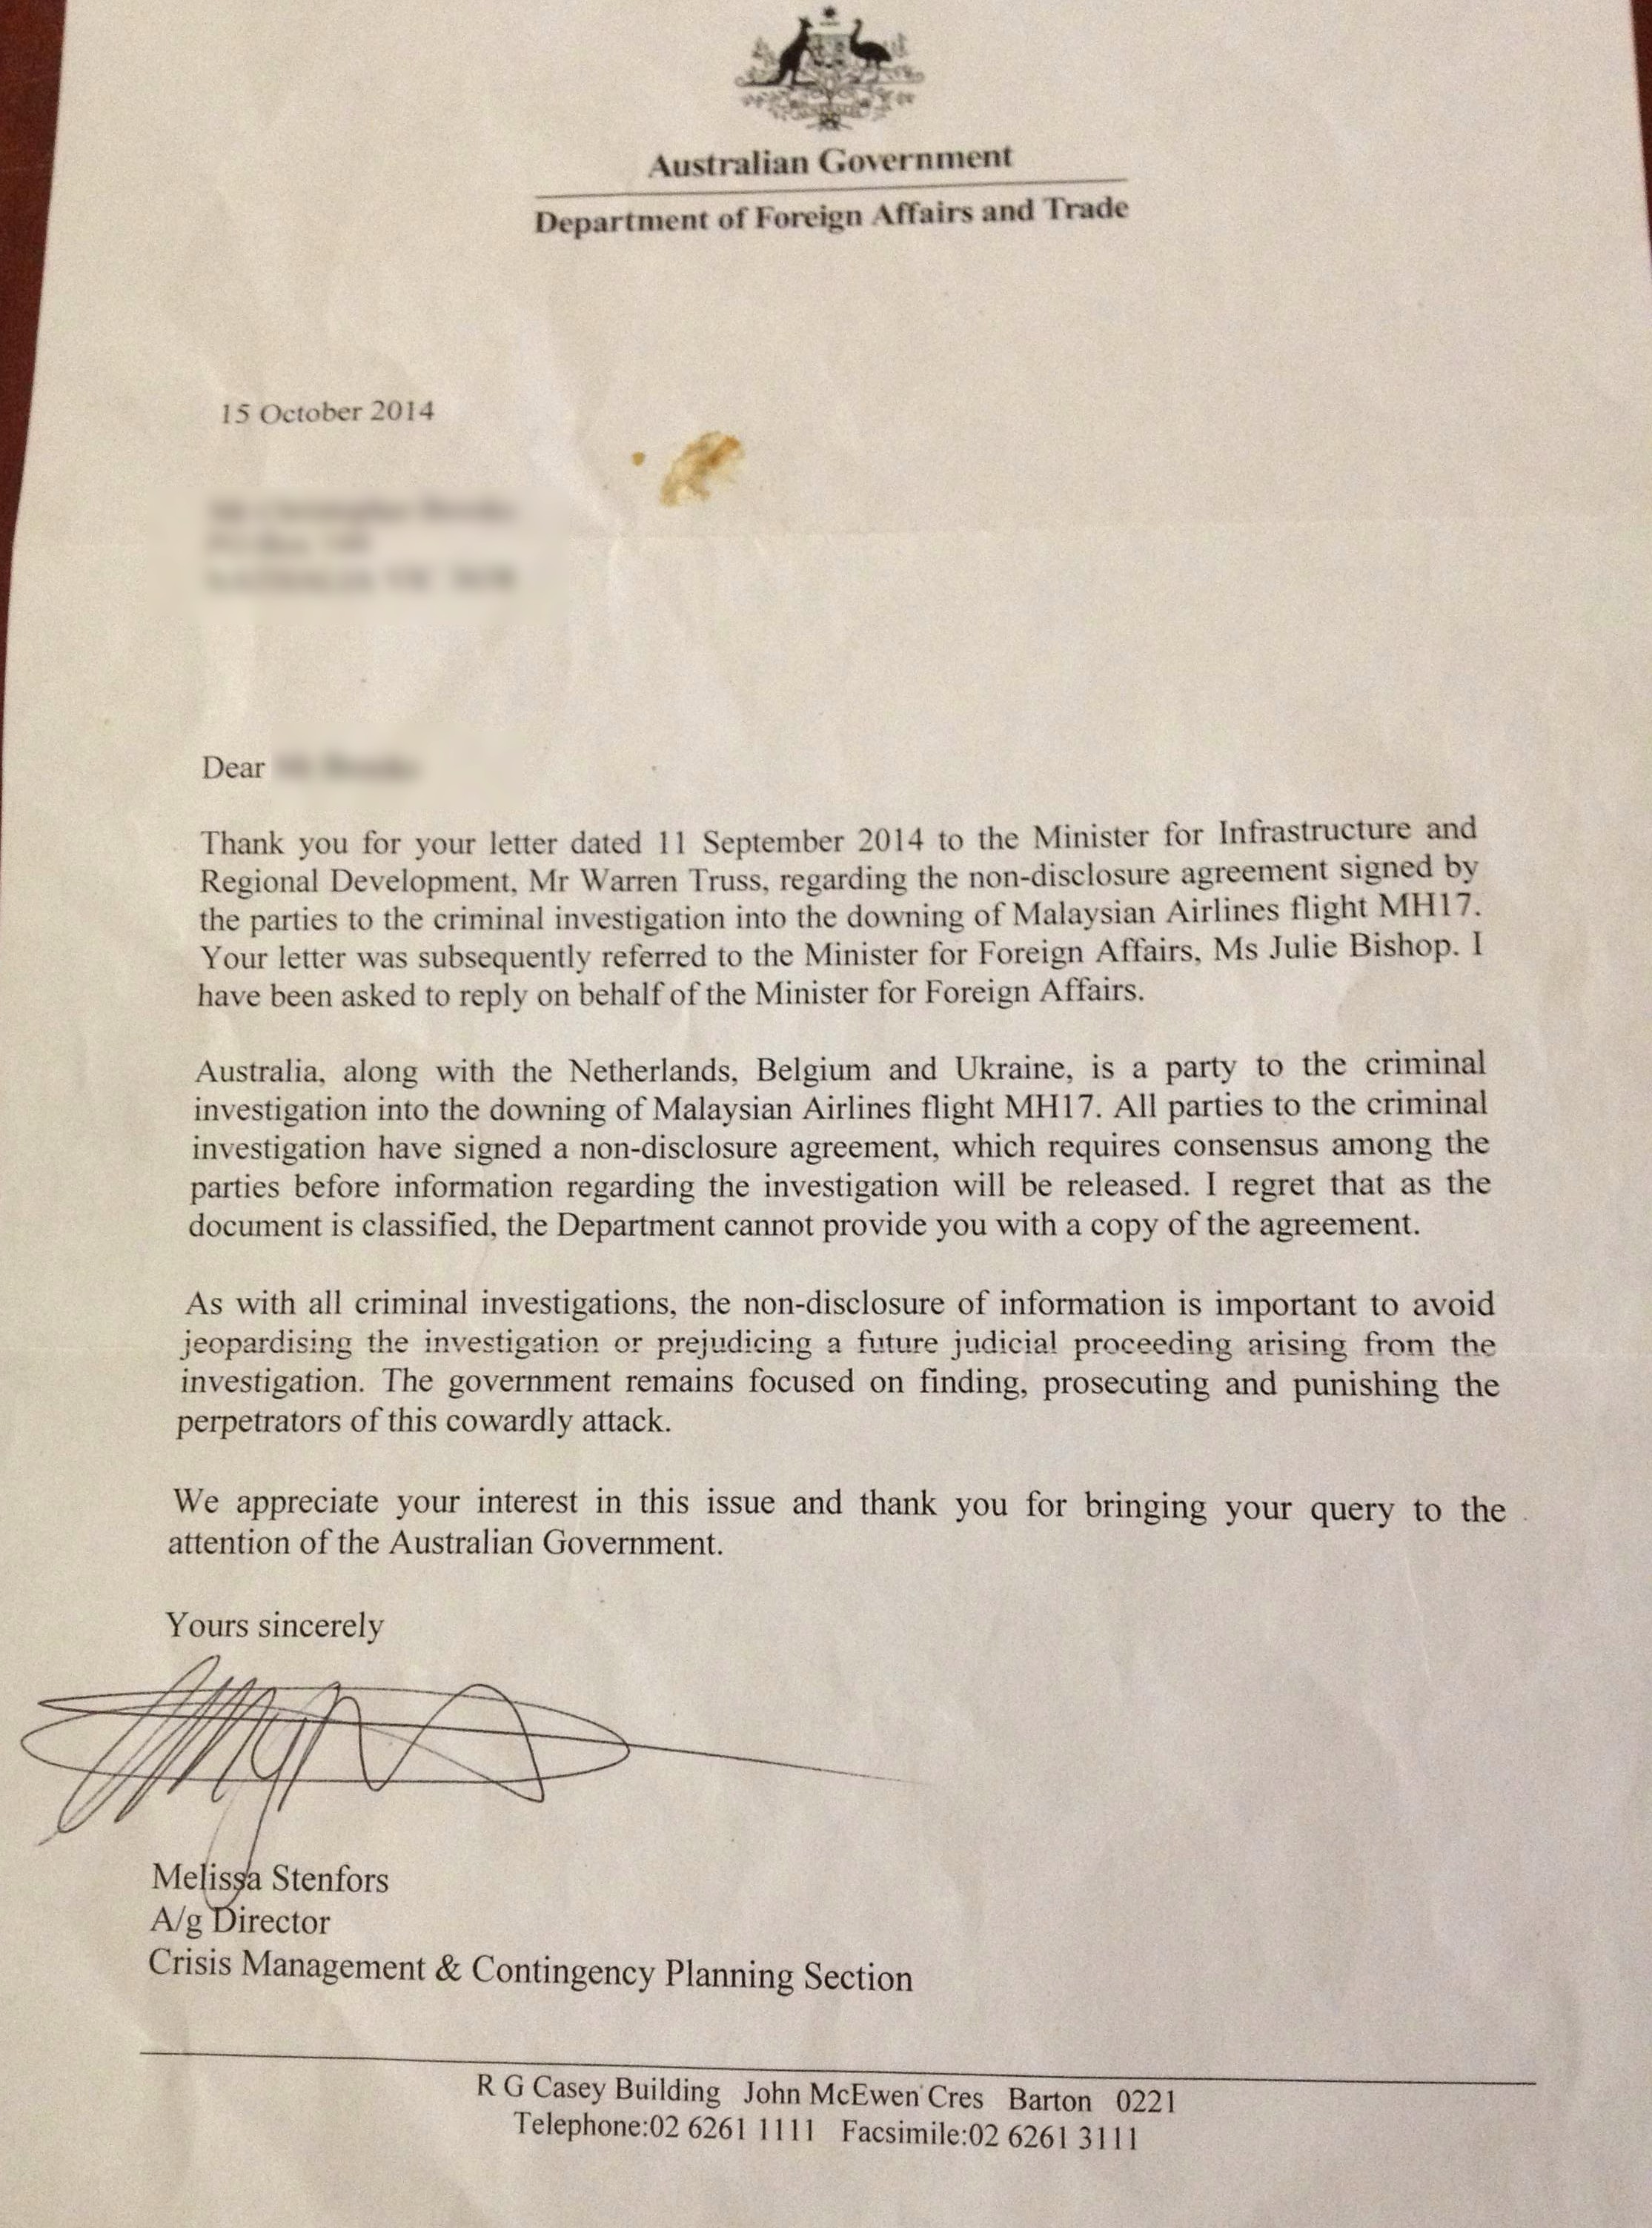 mh17 letter blurred